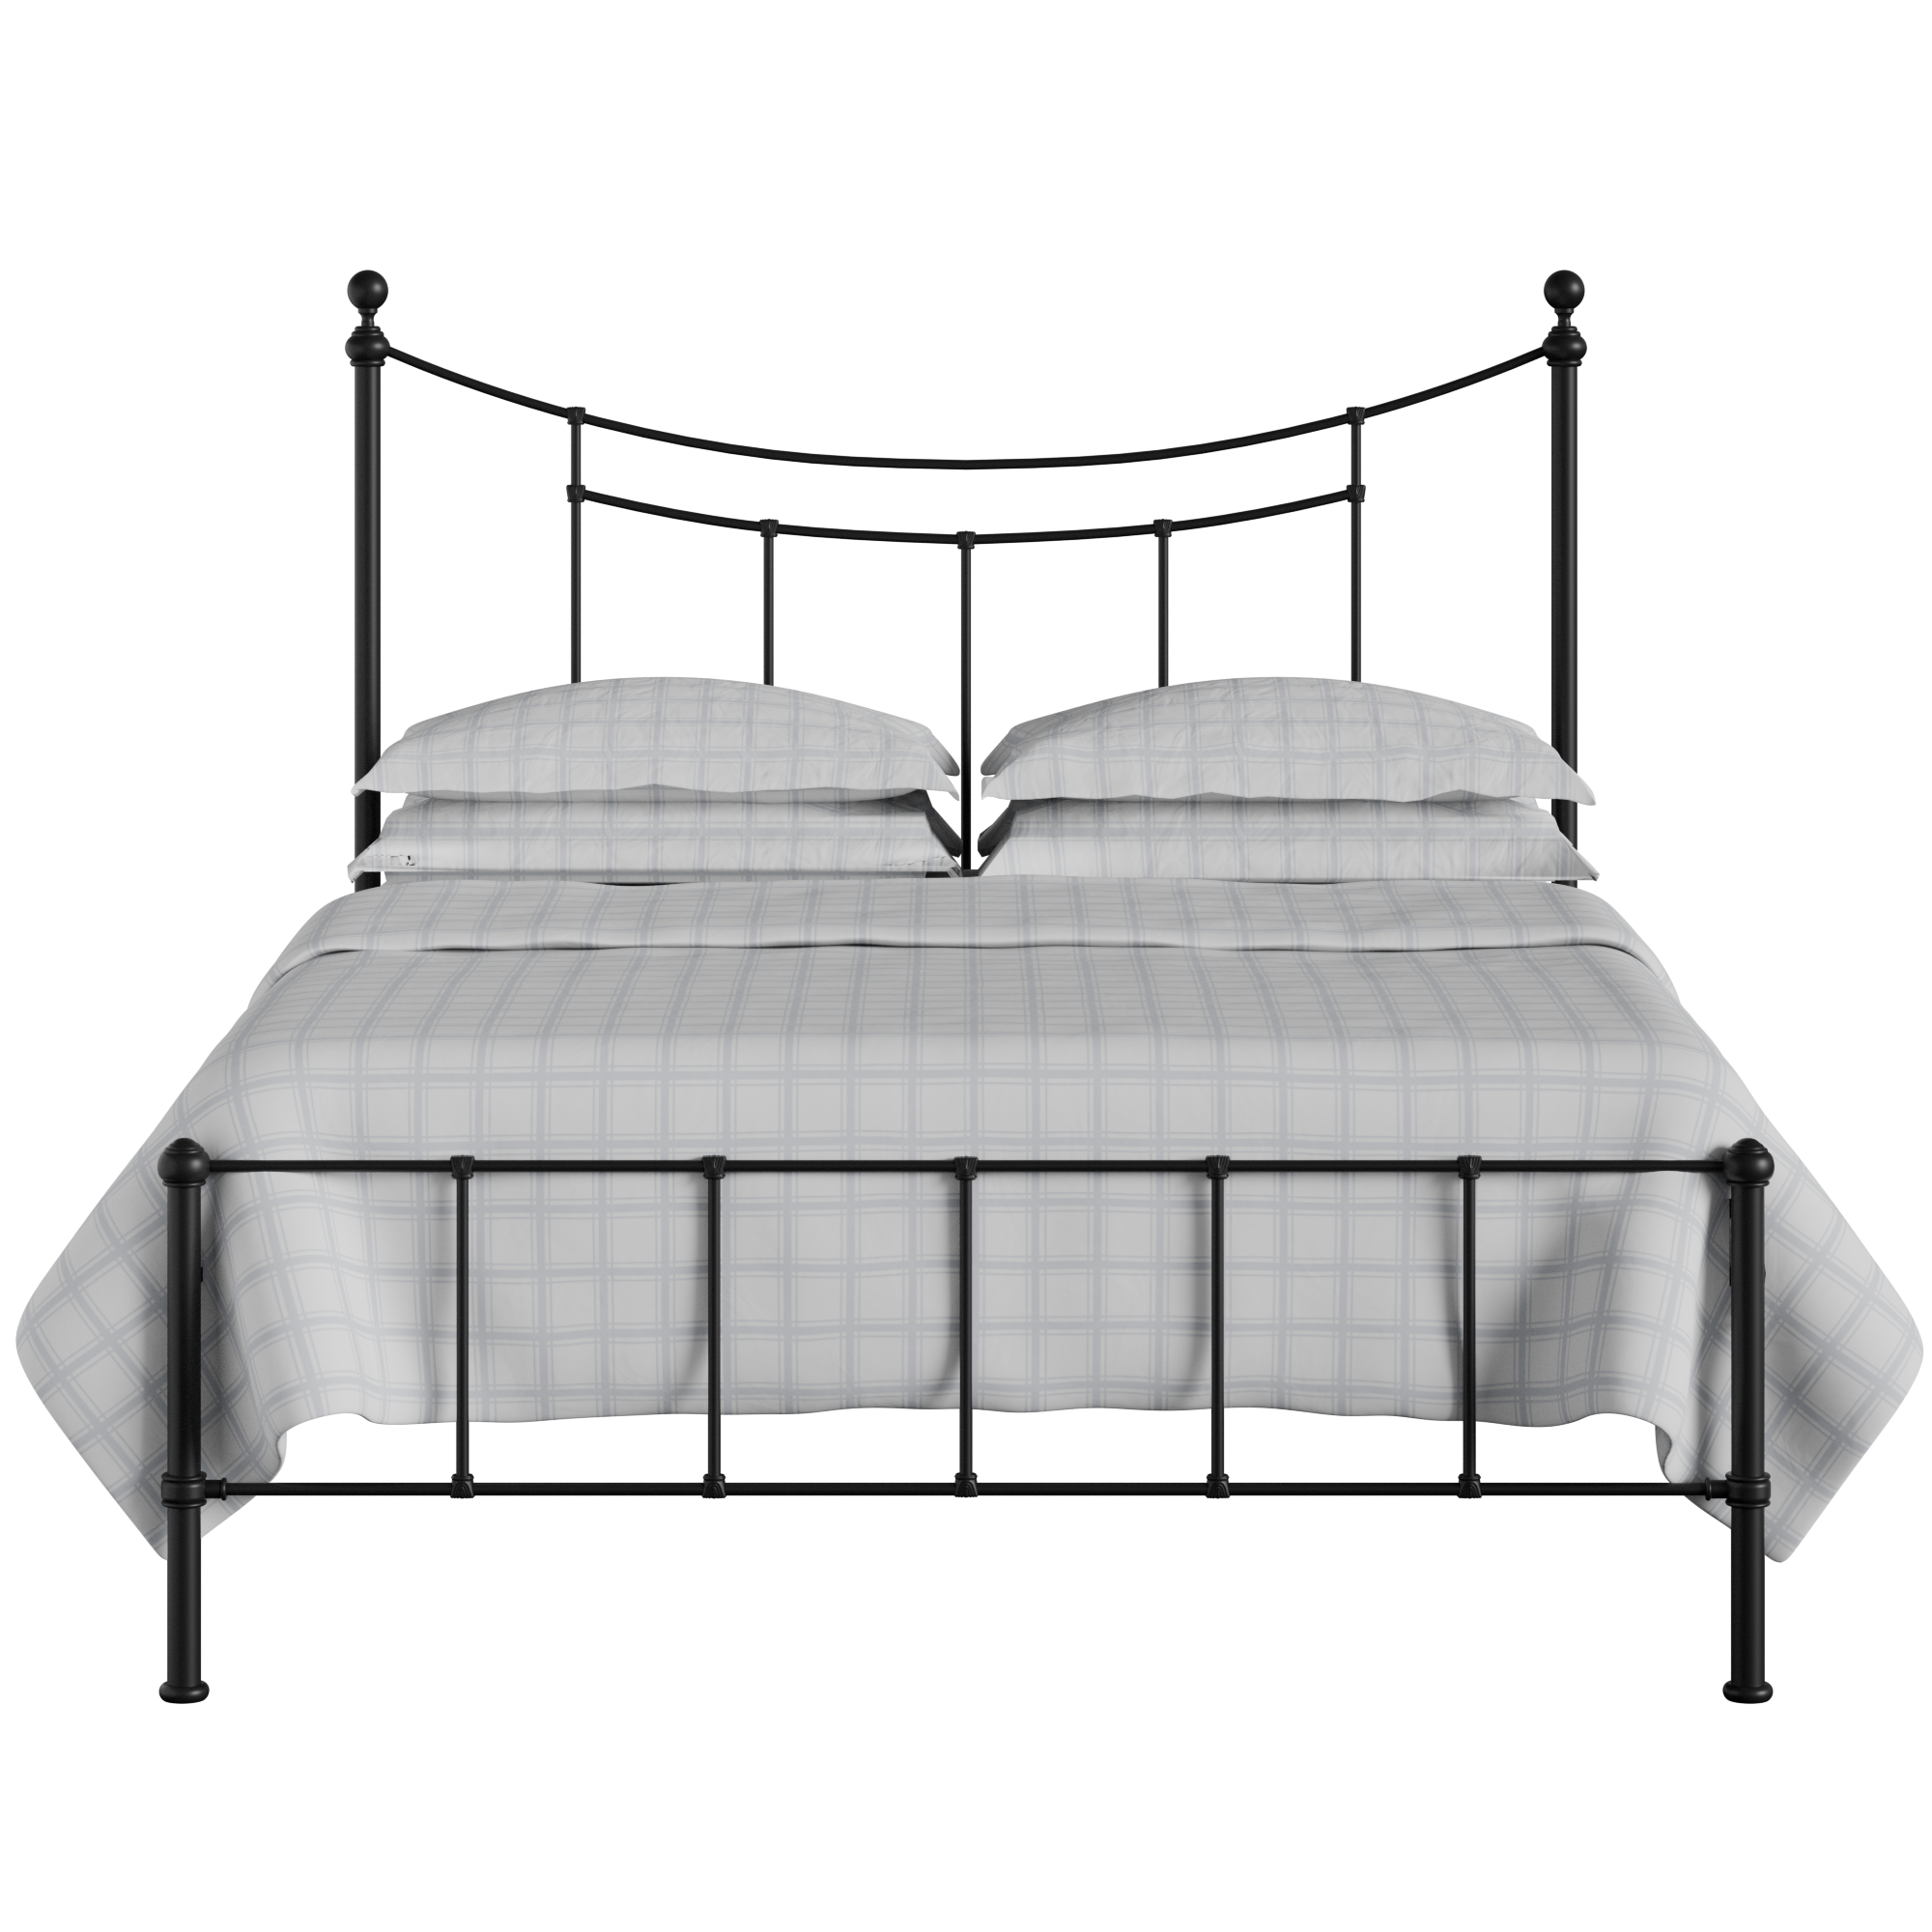 Isabelle iron/metal bed in black